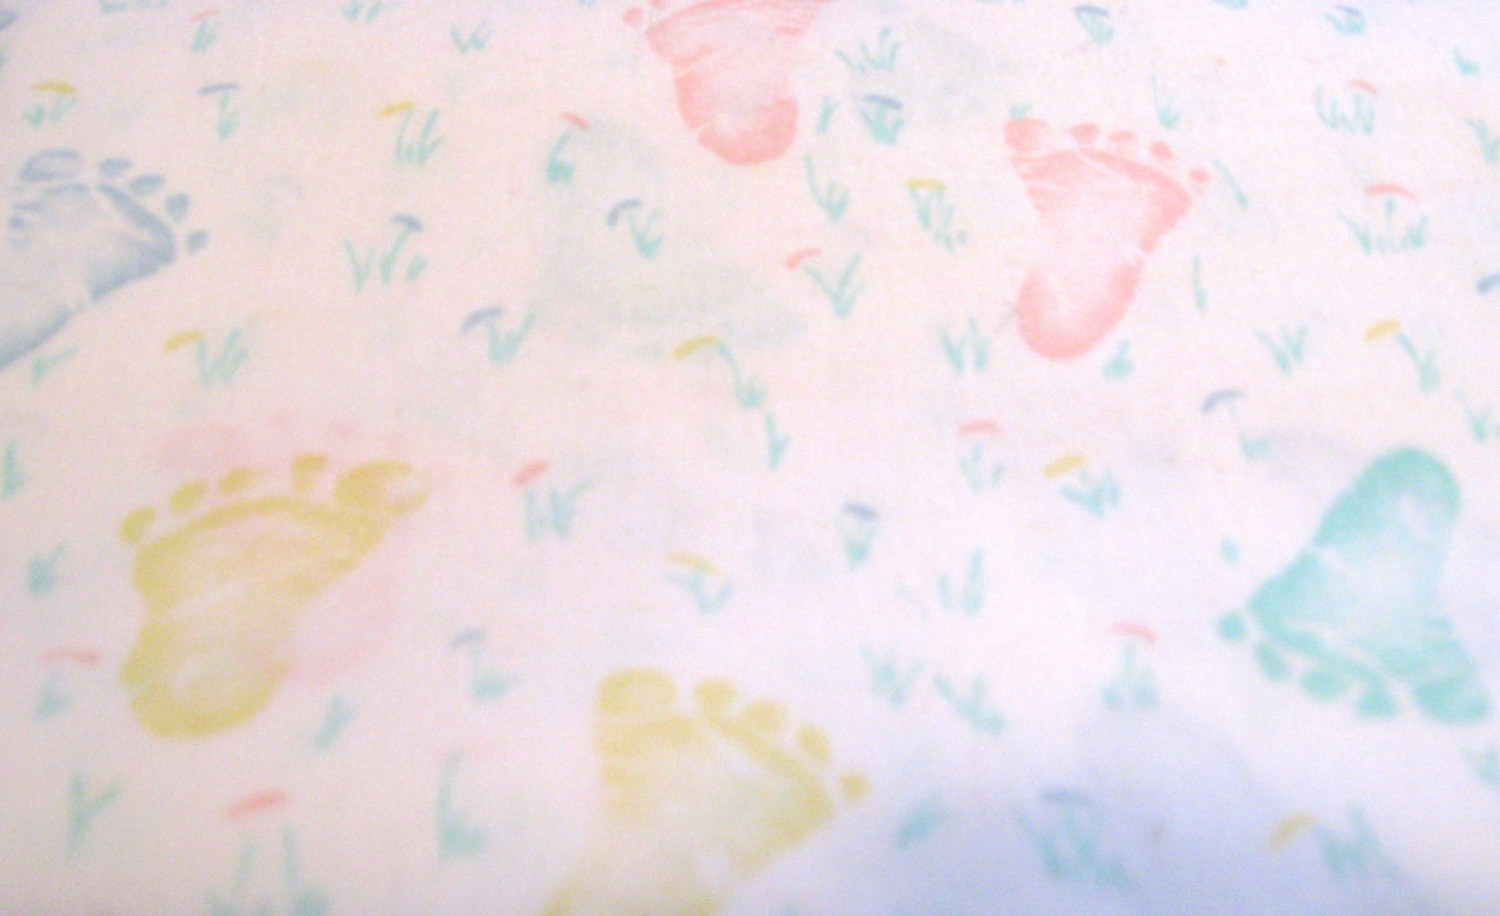  use the form below to delete this baby footprint backgrounds wallpaper